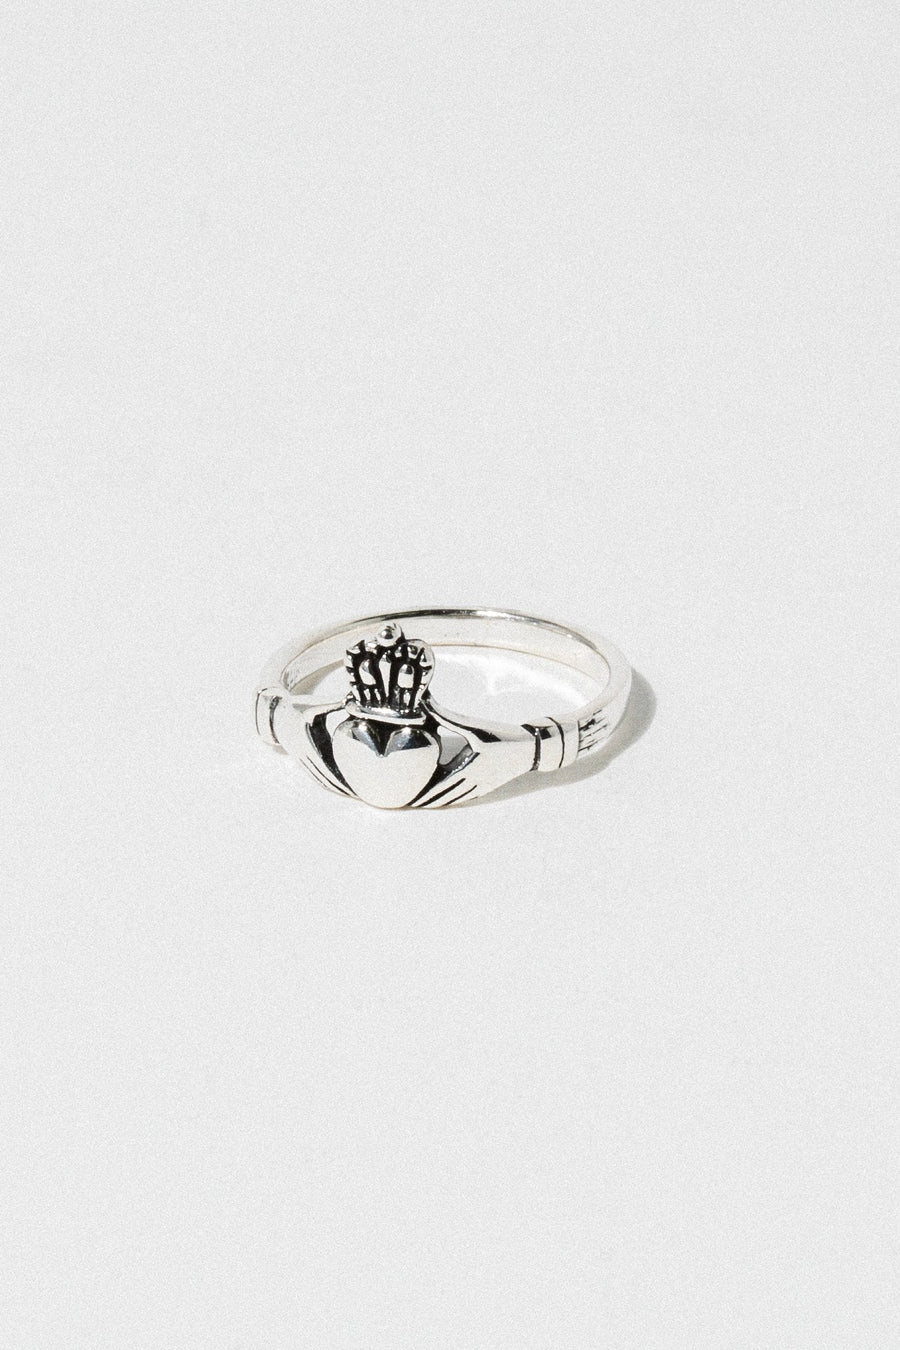 The Wellman Group Jewelry US 5 / Silver Claddagh Ring